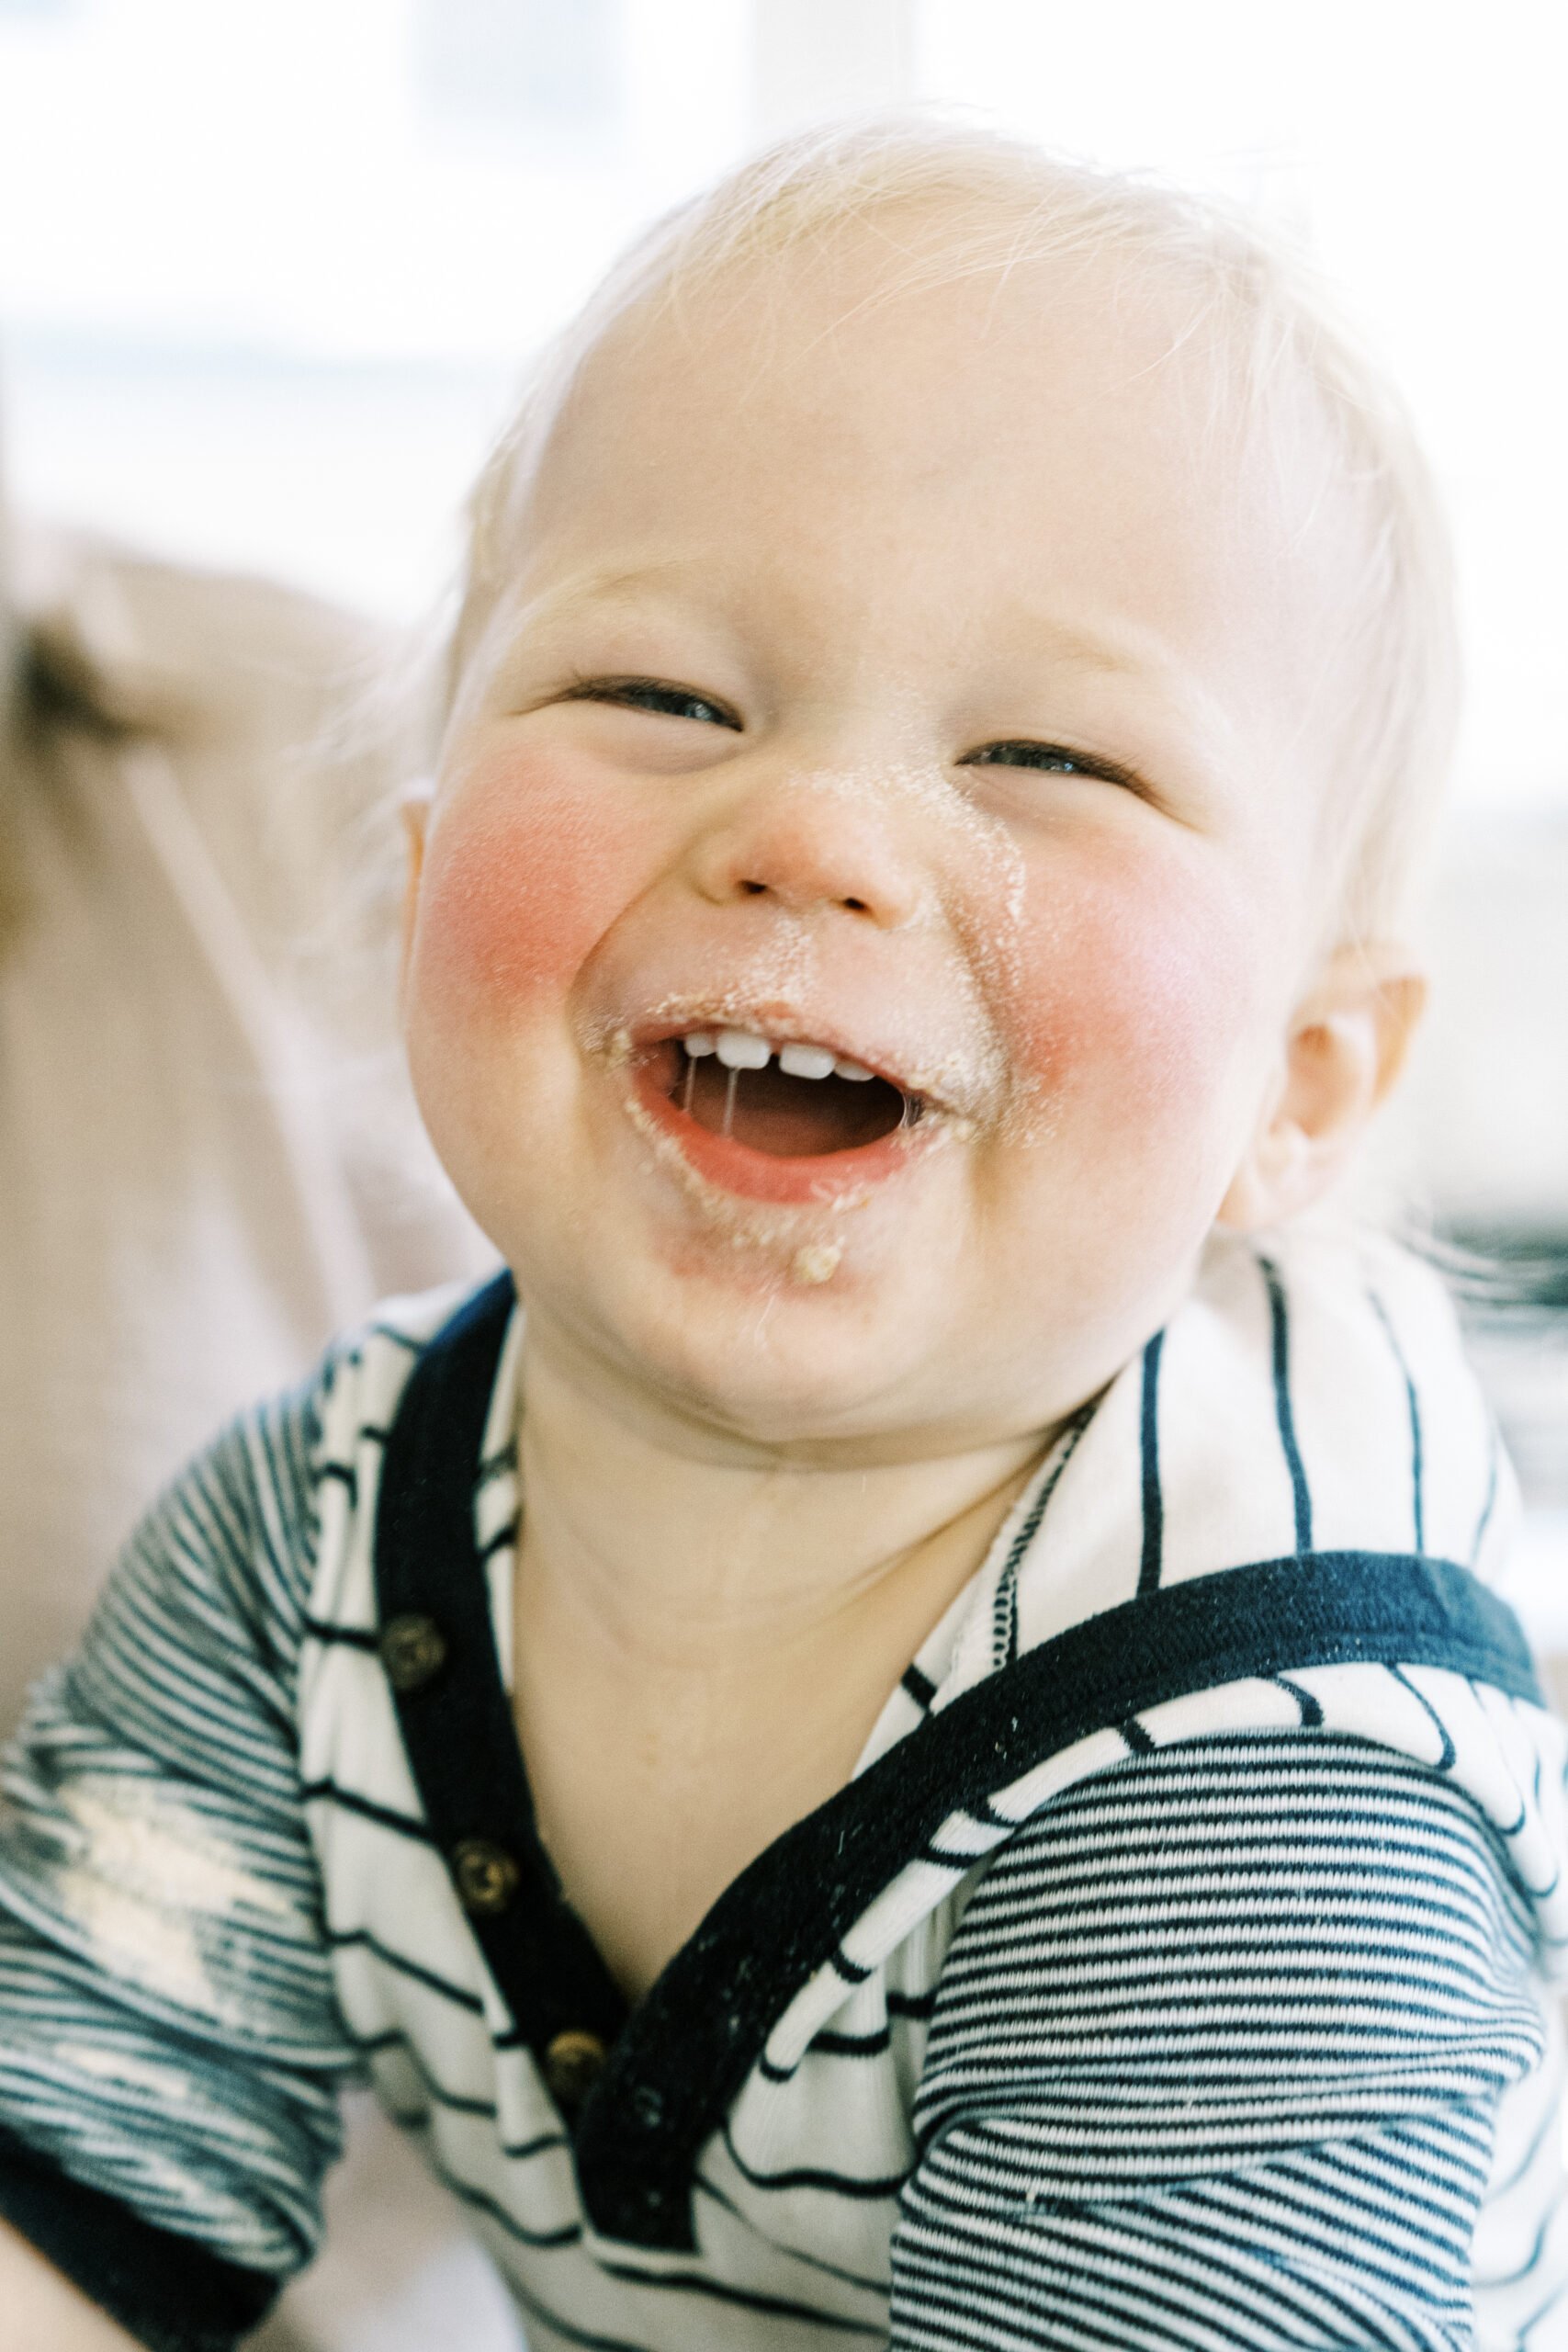 baby smiling covered in flour